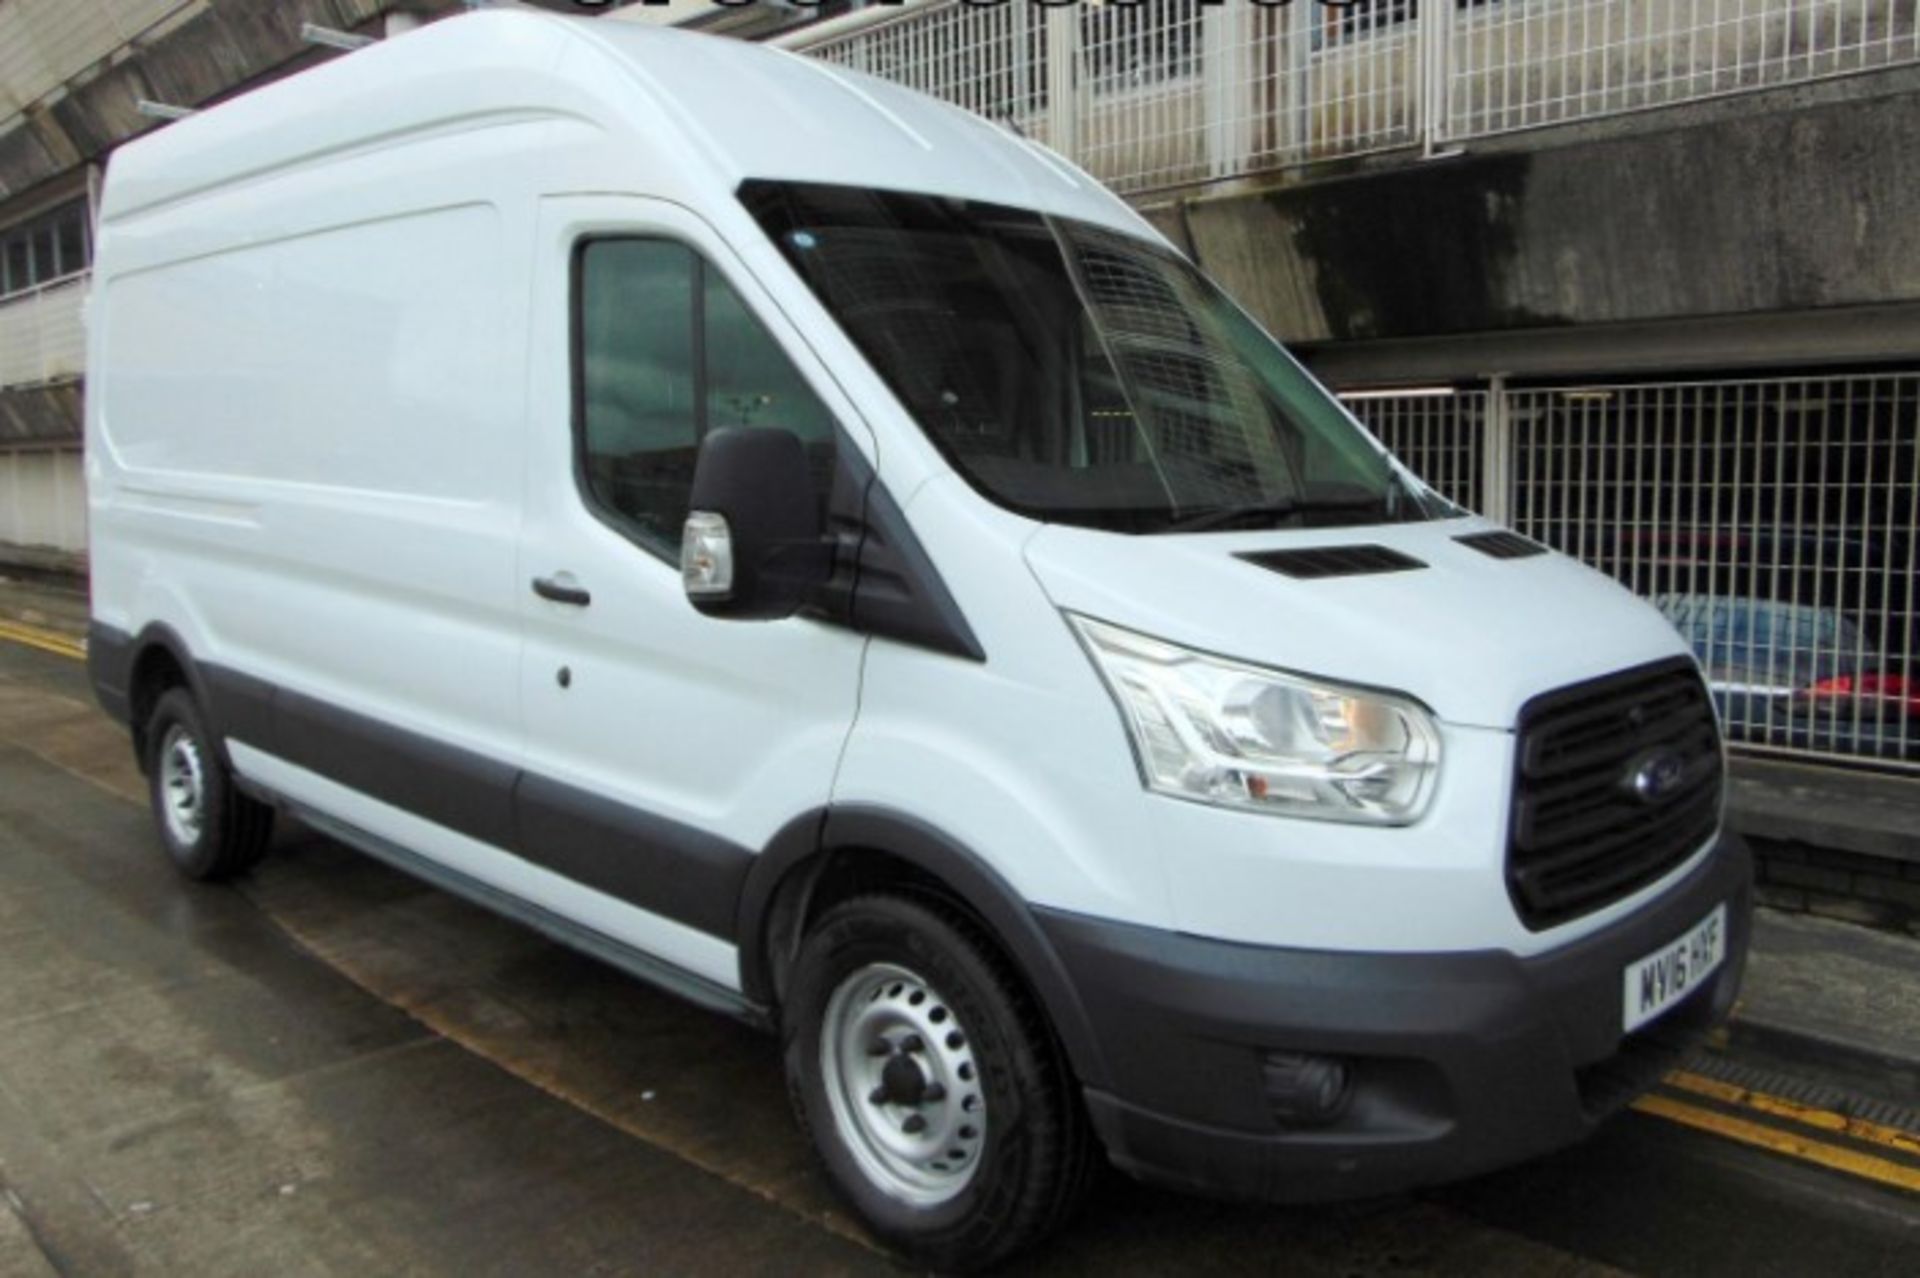 DRIVE WITH CONFIDENCE: 2016 FORD TRANSIT, OCT '24 MOT, BLUETOOTH